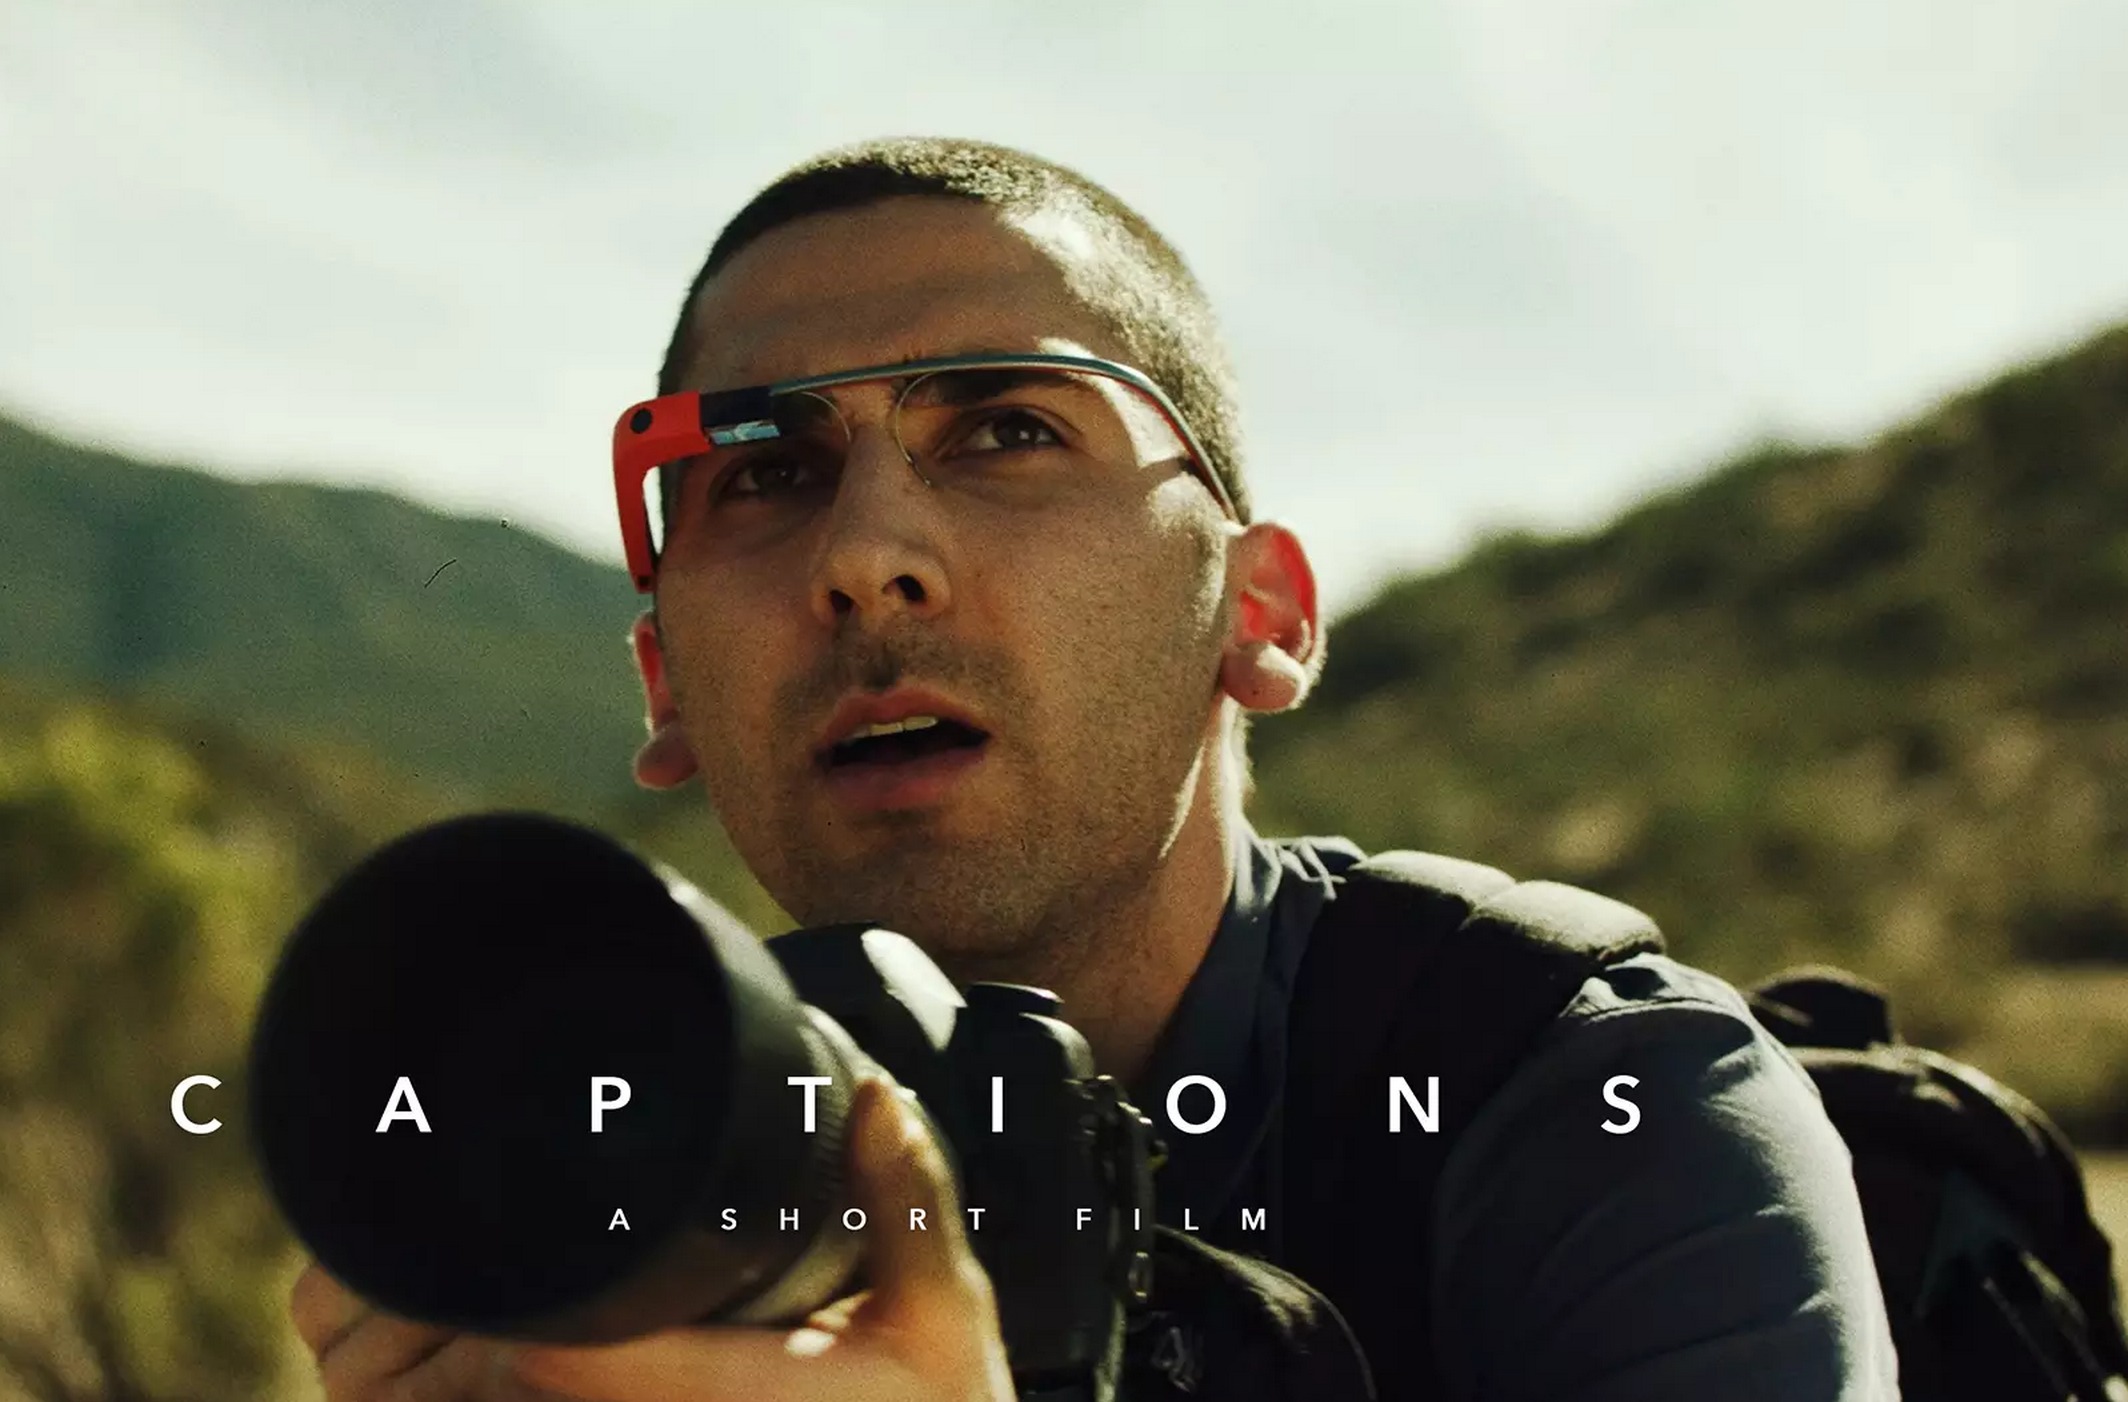 Captions by Google Glass. Commercial